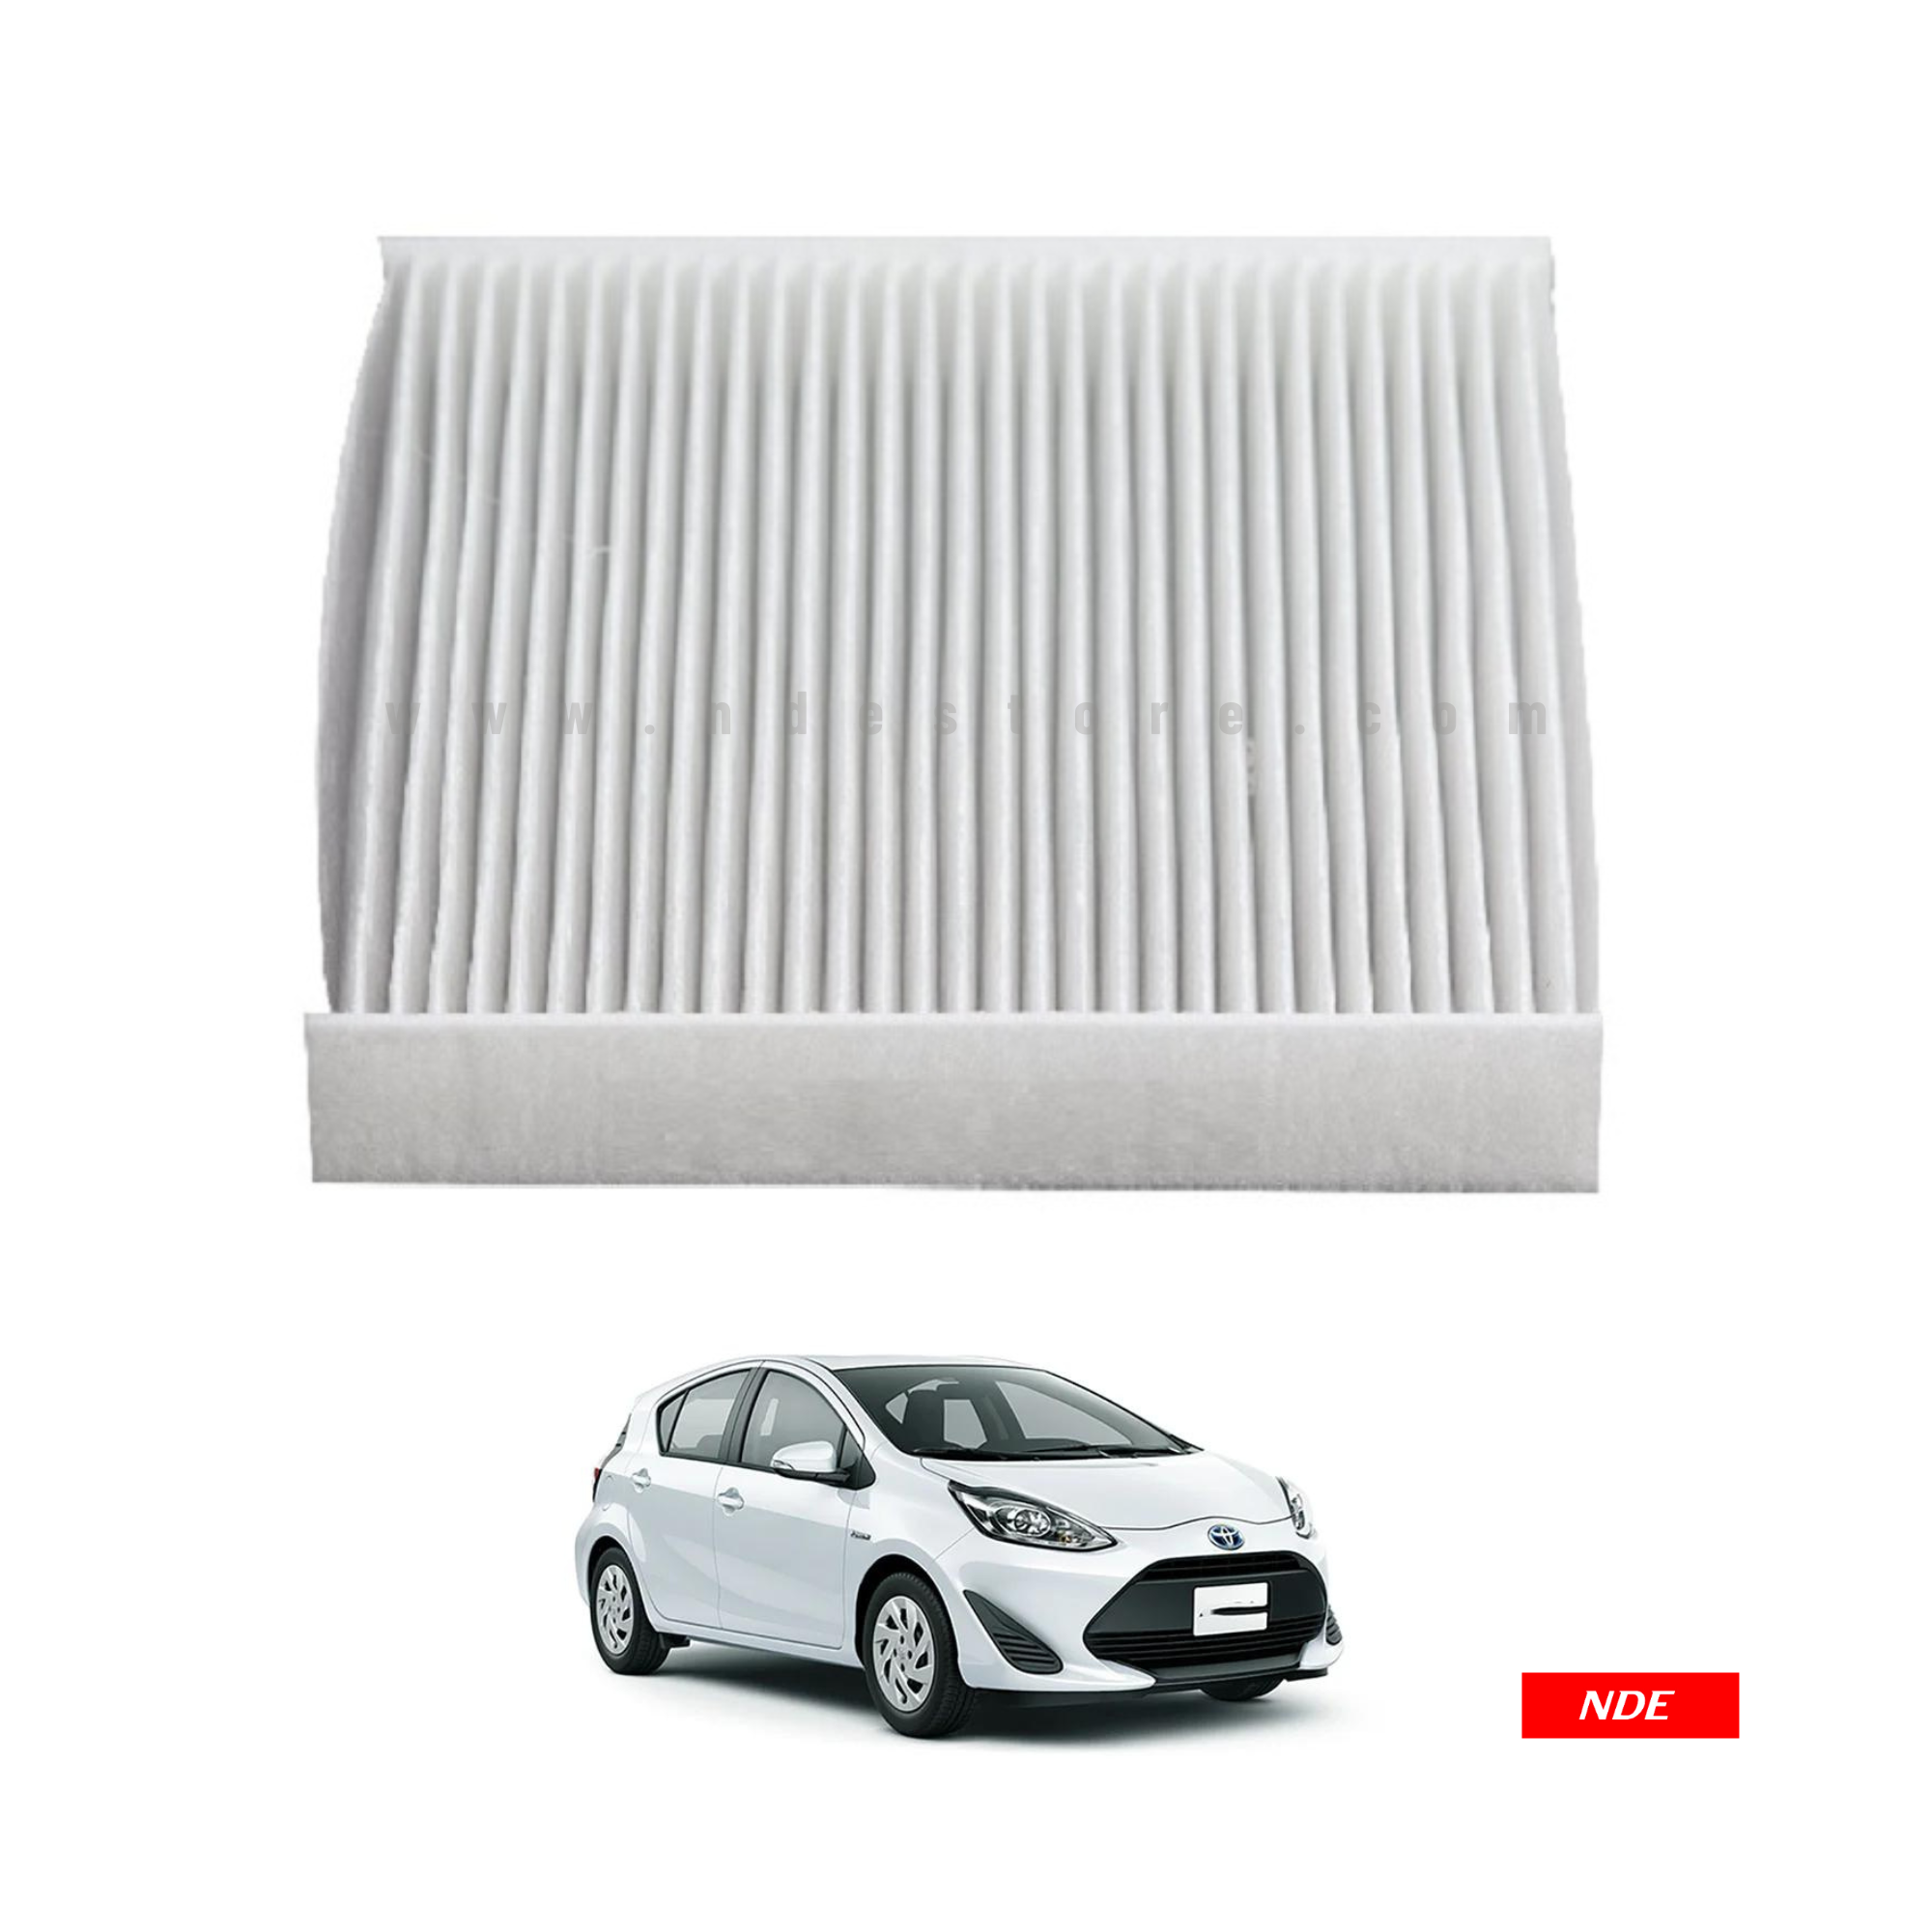 CABIN AIR FILTER / AC FILTER FOR TOYOTA AQUA (IMPORTED)